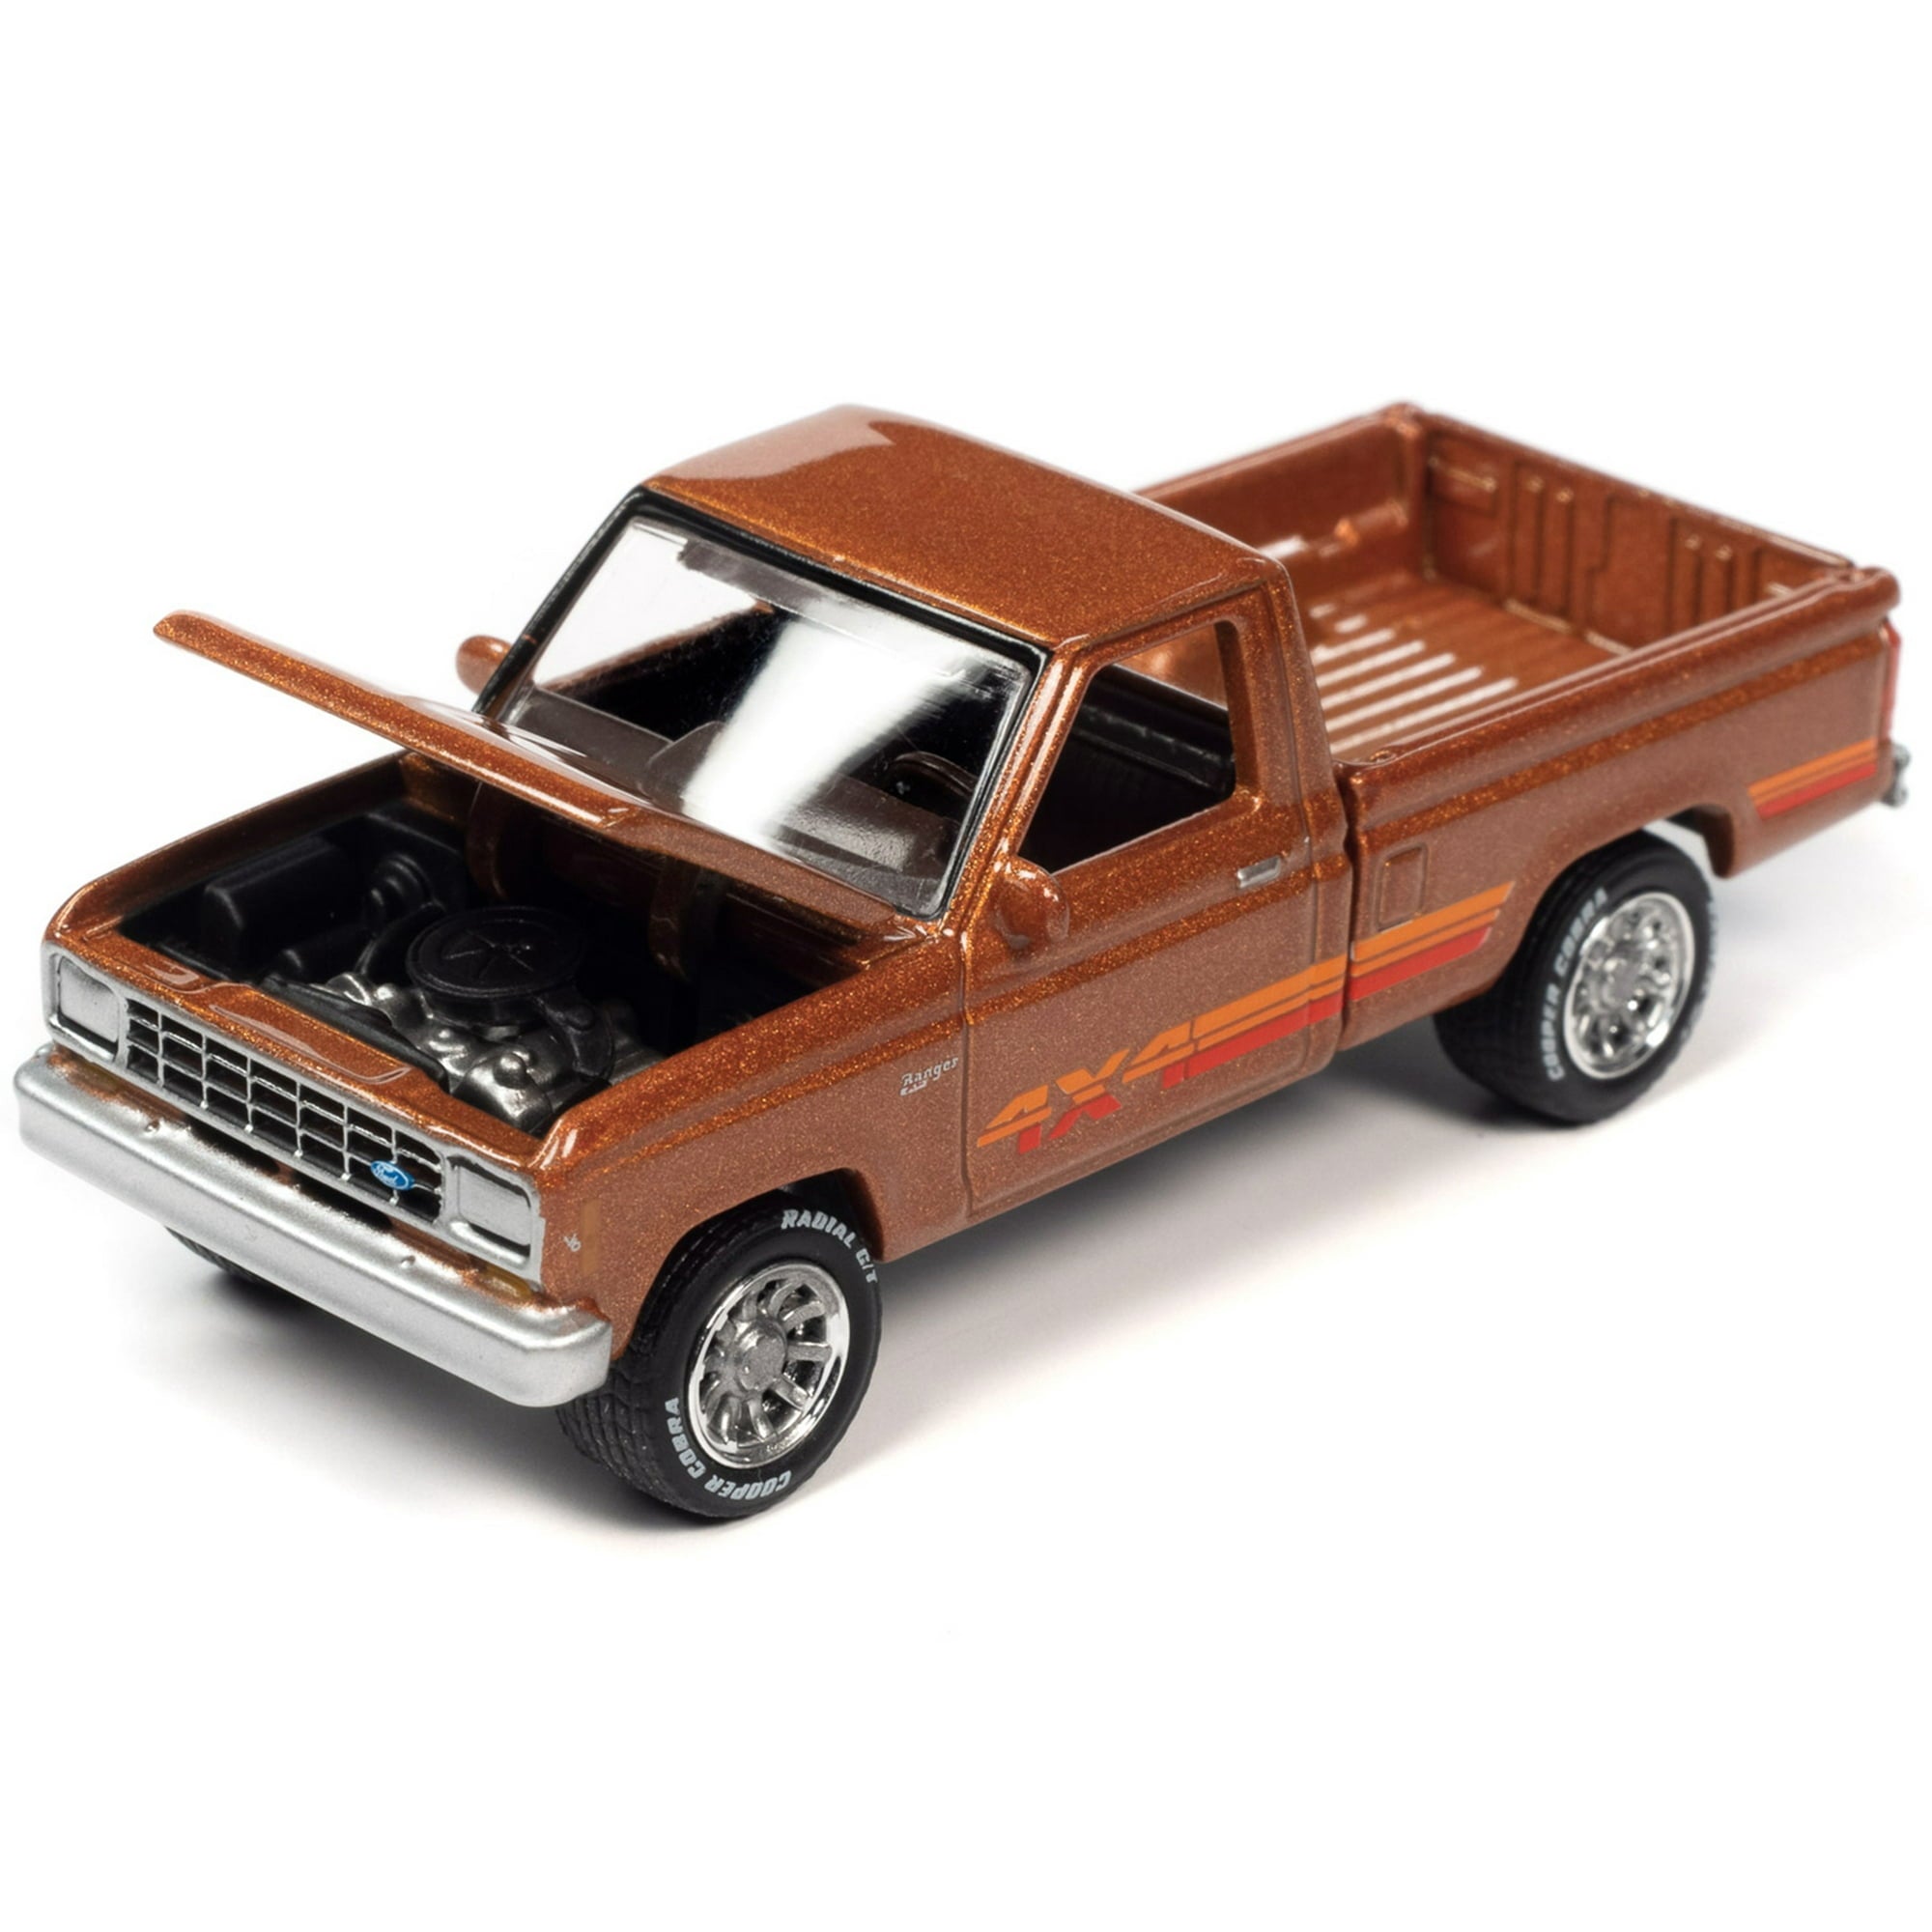 1/64 1985 FORD RANGER XL PICKUP - CLASSIC GOLD COLLECTION